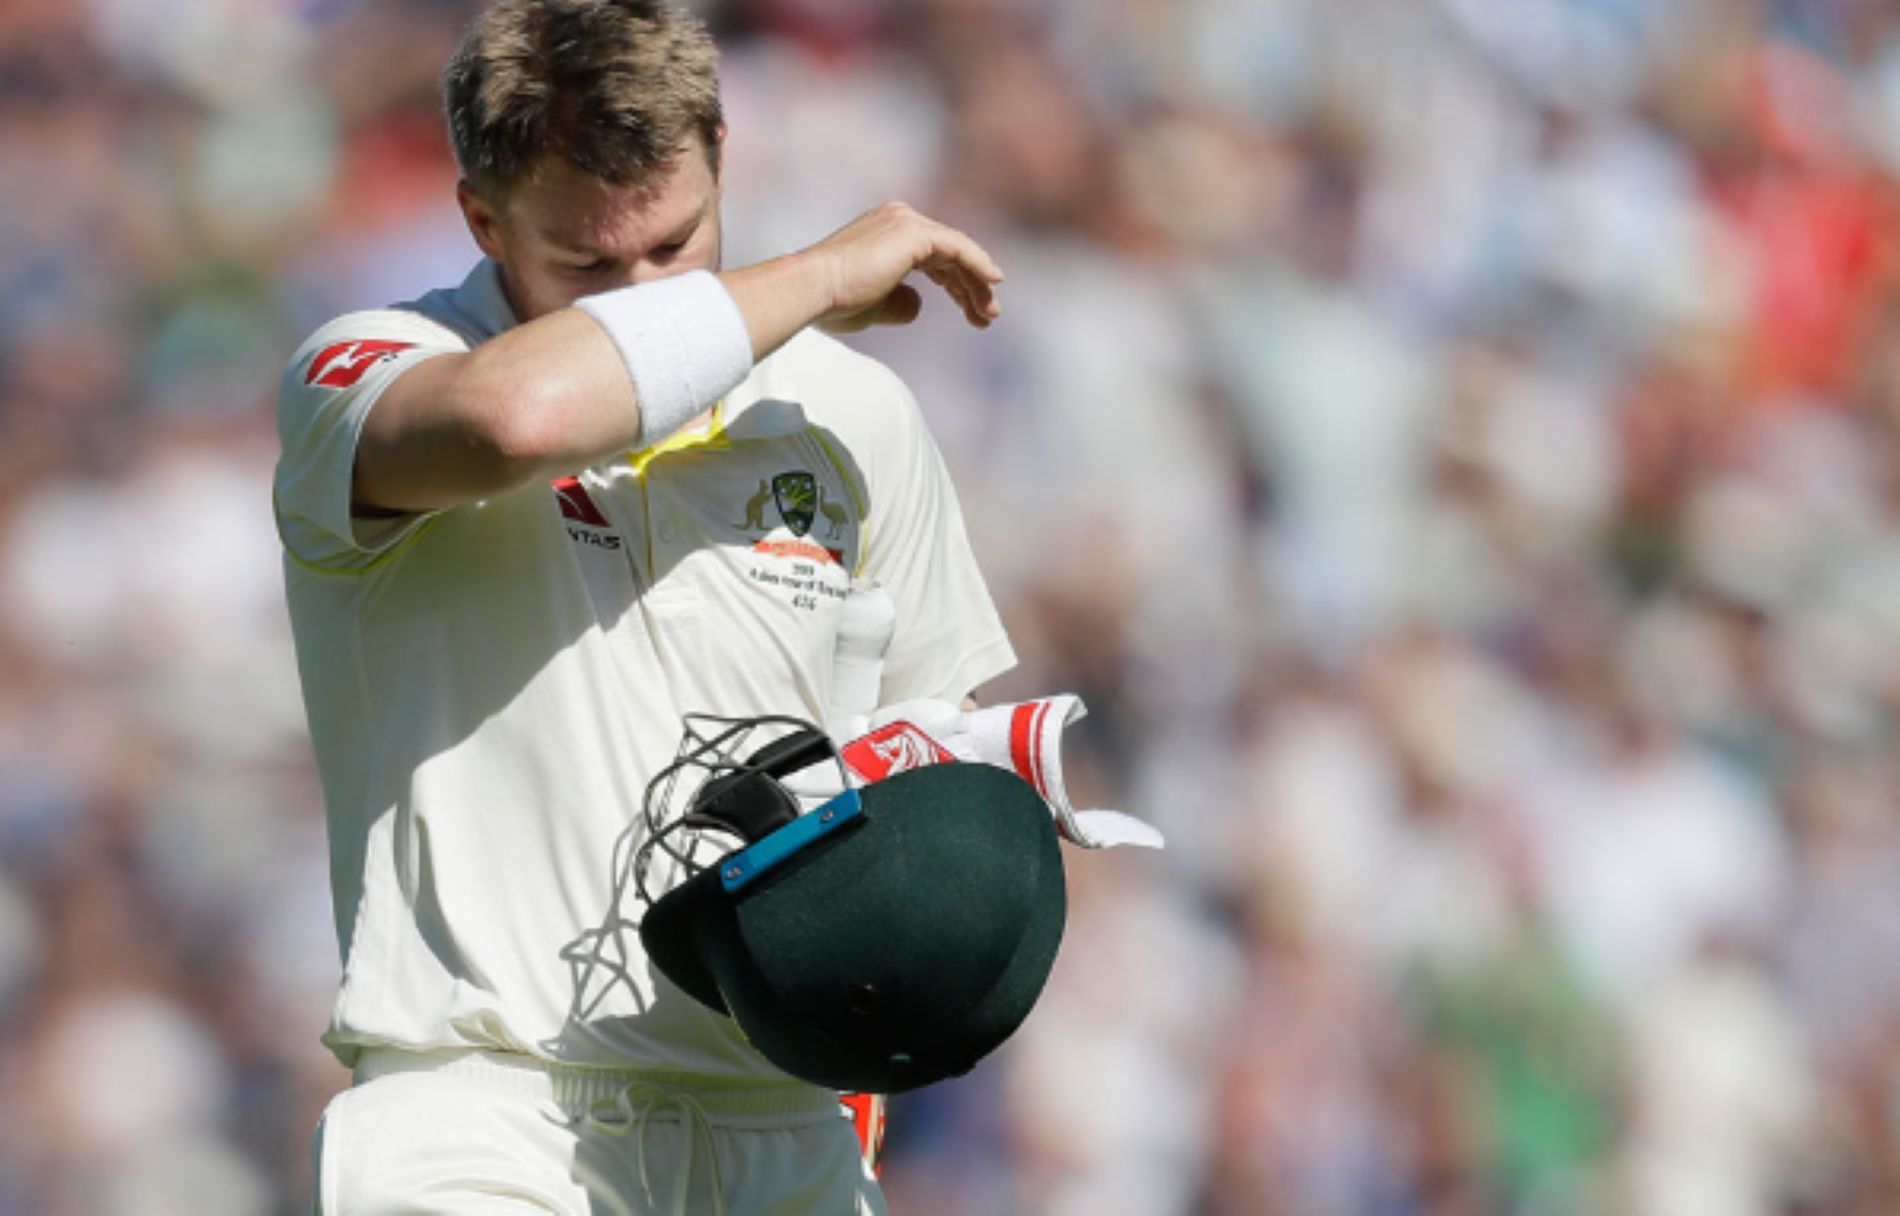 Warner has struggled in Tests over the last two years